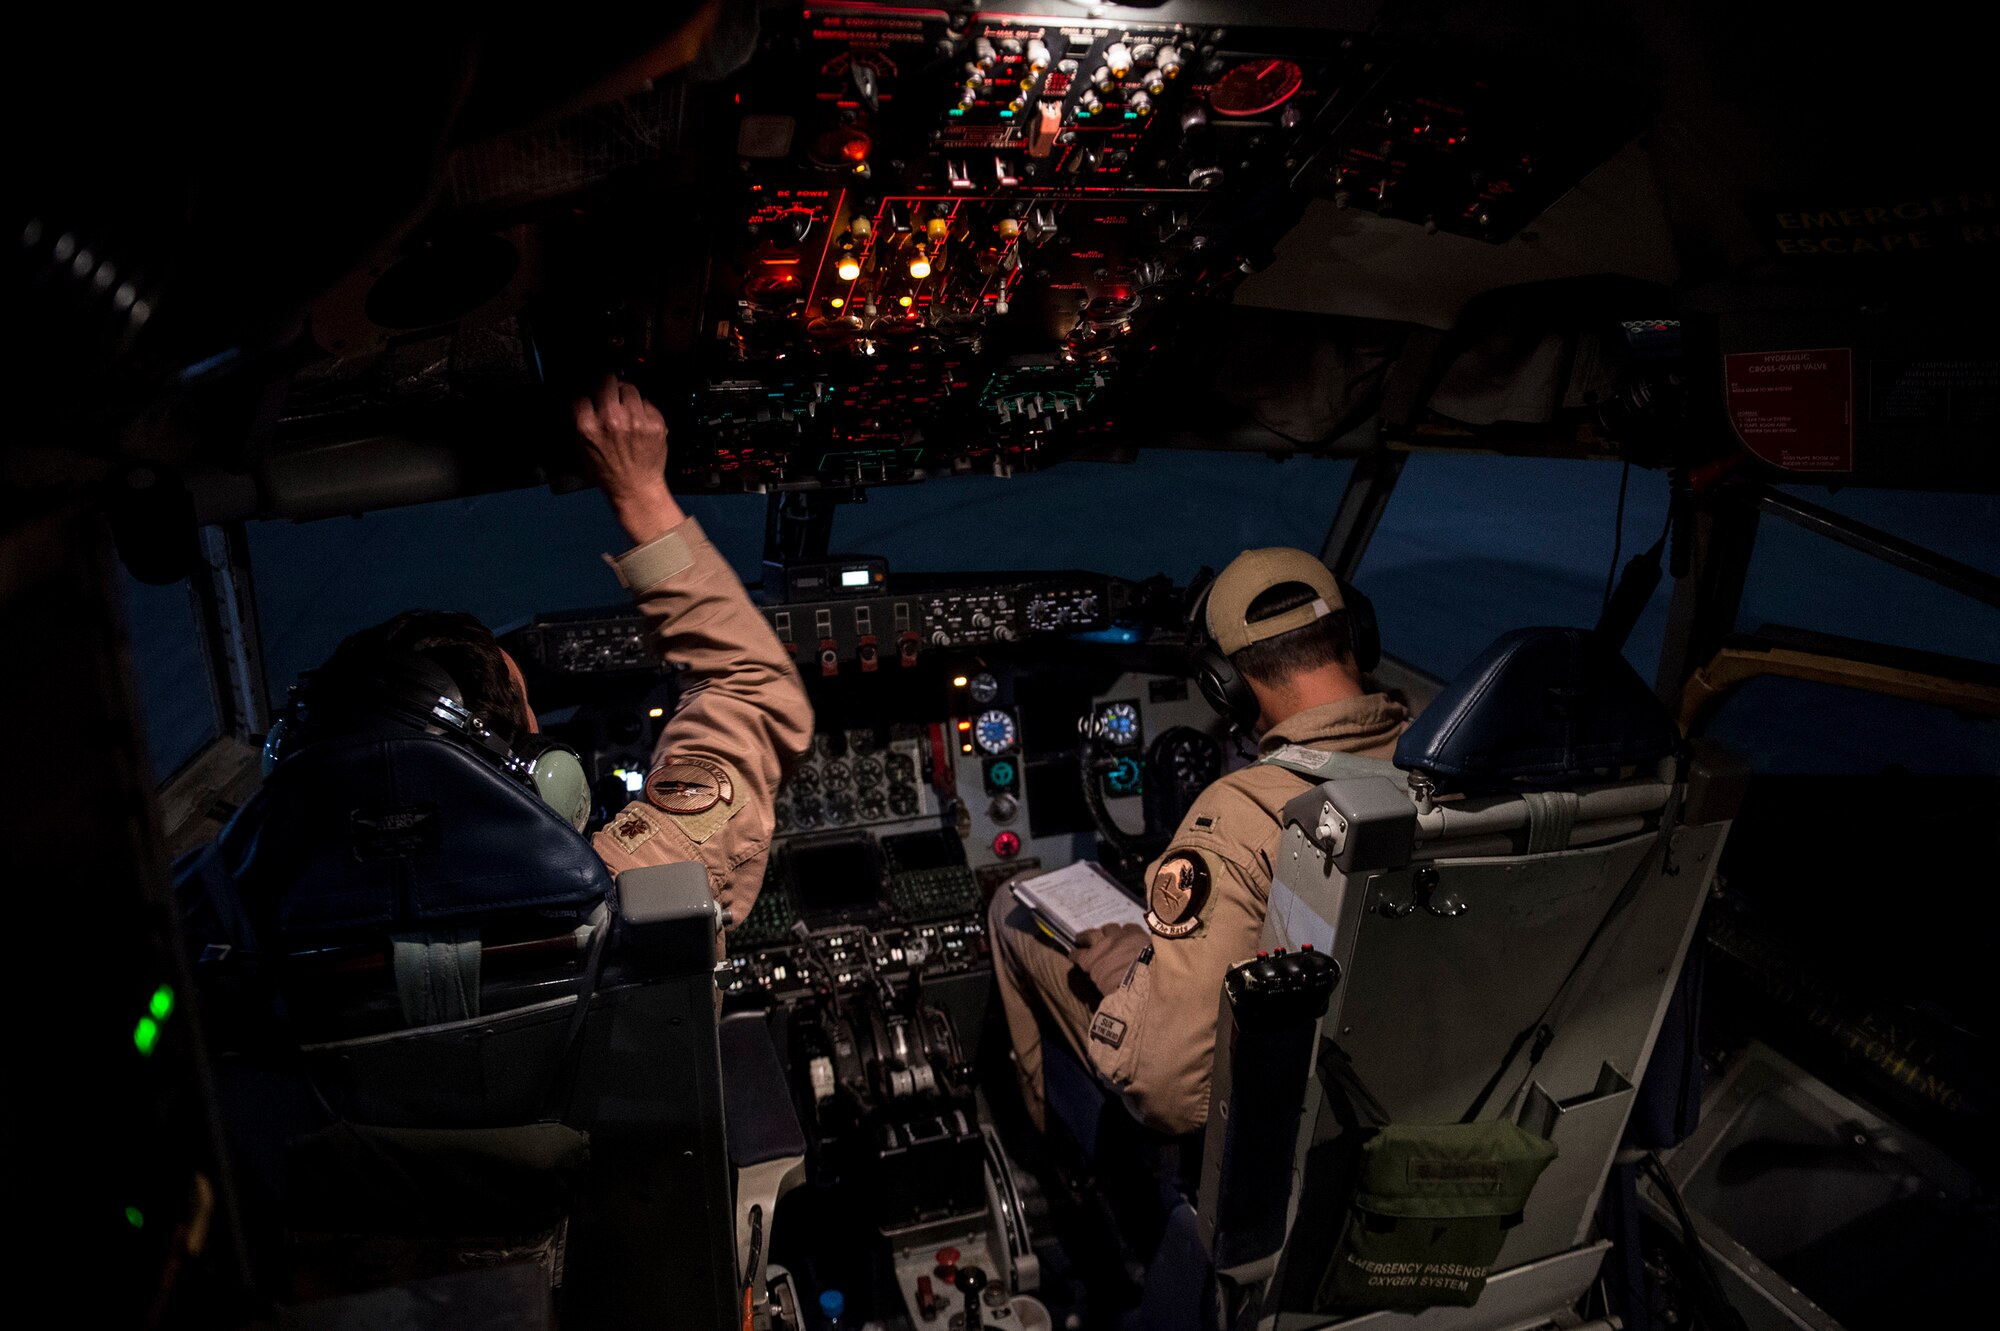 U.S. Air Force aircrew assigned to the 340th Expeditionary Air Refueling Squadron return from flight on a KC-135 Stratotanker at Al Udeid Air Base, Qatar, April 8, 2016. Coalition forces fly daily missions in support of Operation Inherent Resolve. OIR is the coalition intervention against the Islamic State of Iraq and the Levant. (U.S. Air Force photo by Staff Sgt. Corey Hook/Released)